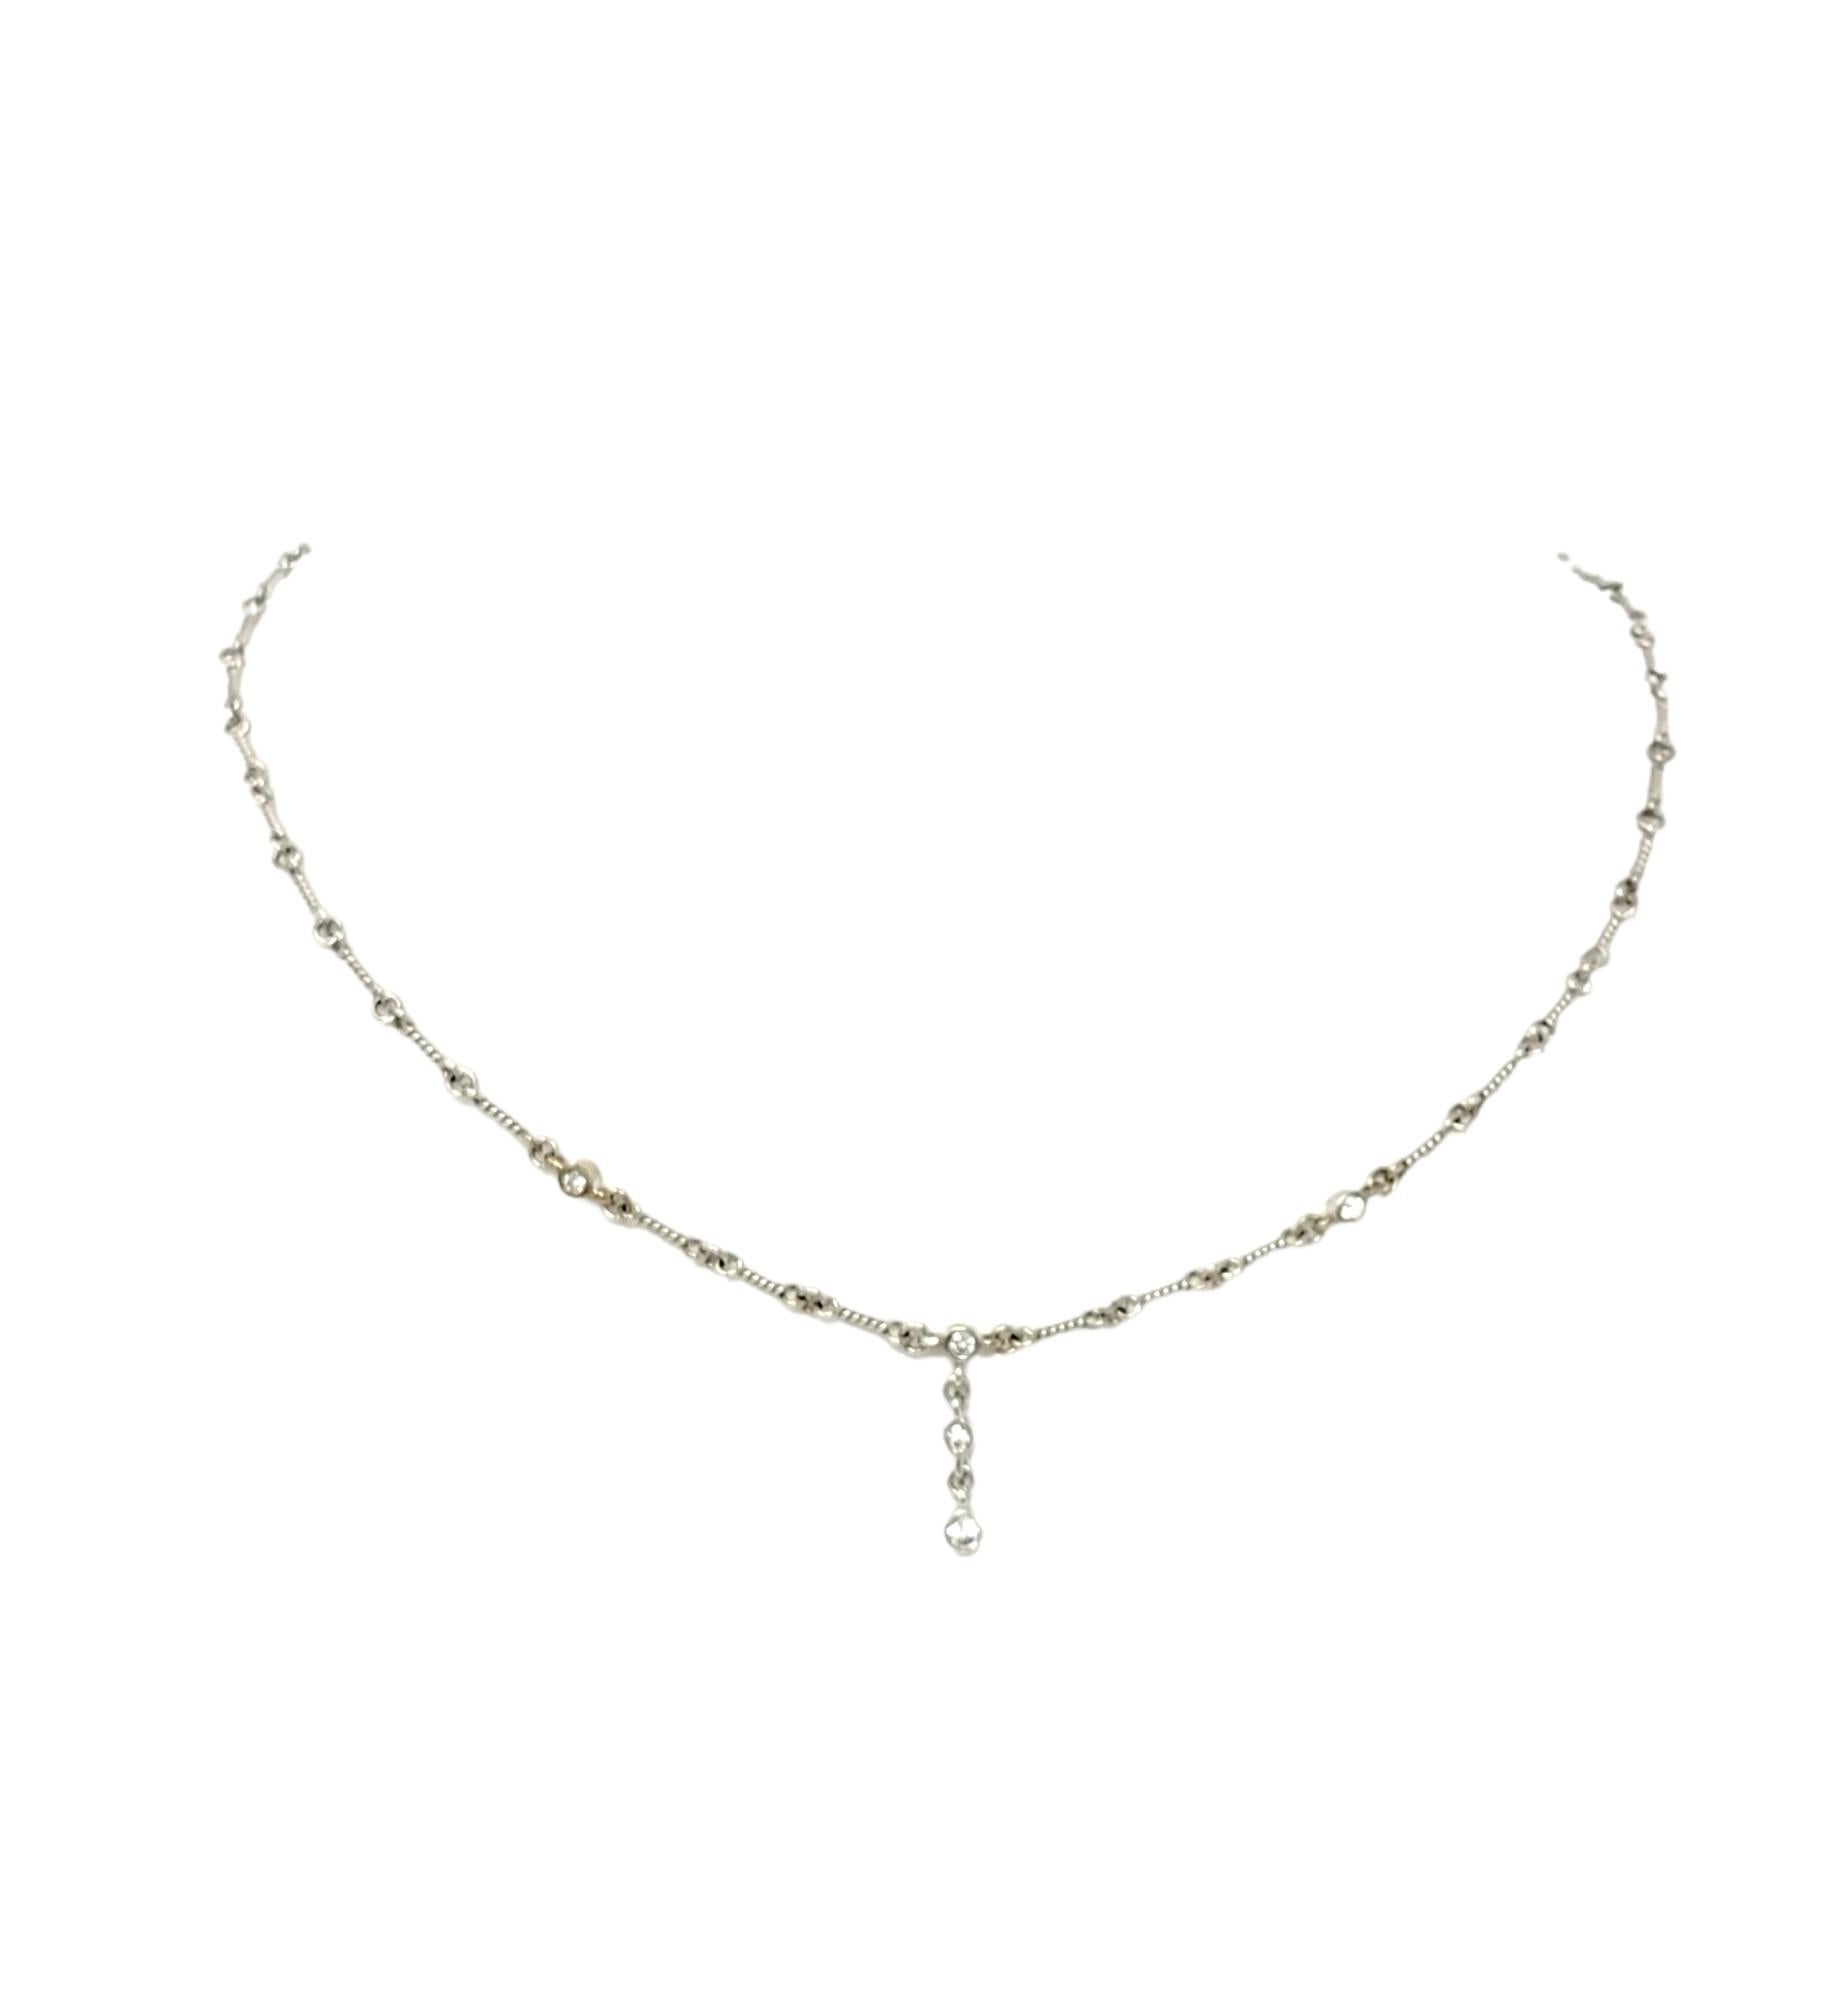 This absolutely beautiful diamond drop necklace is simple but elegant. Featuring a delicate twisted chain and a sparkling graduated drop of natural round diamonds, this lovely necklace goes with just about everything. It features 5 bezel set round